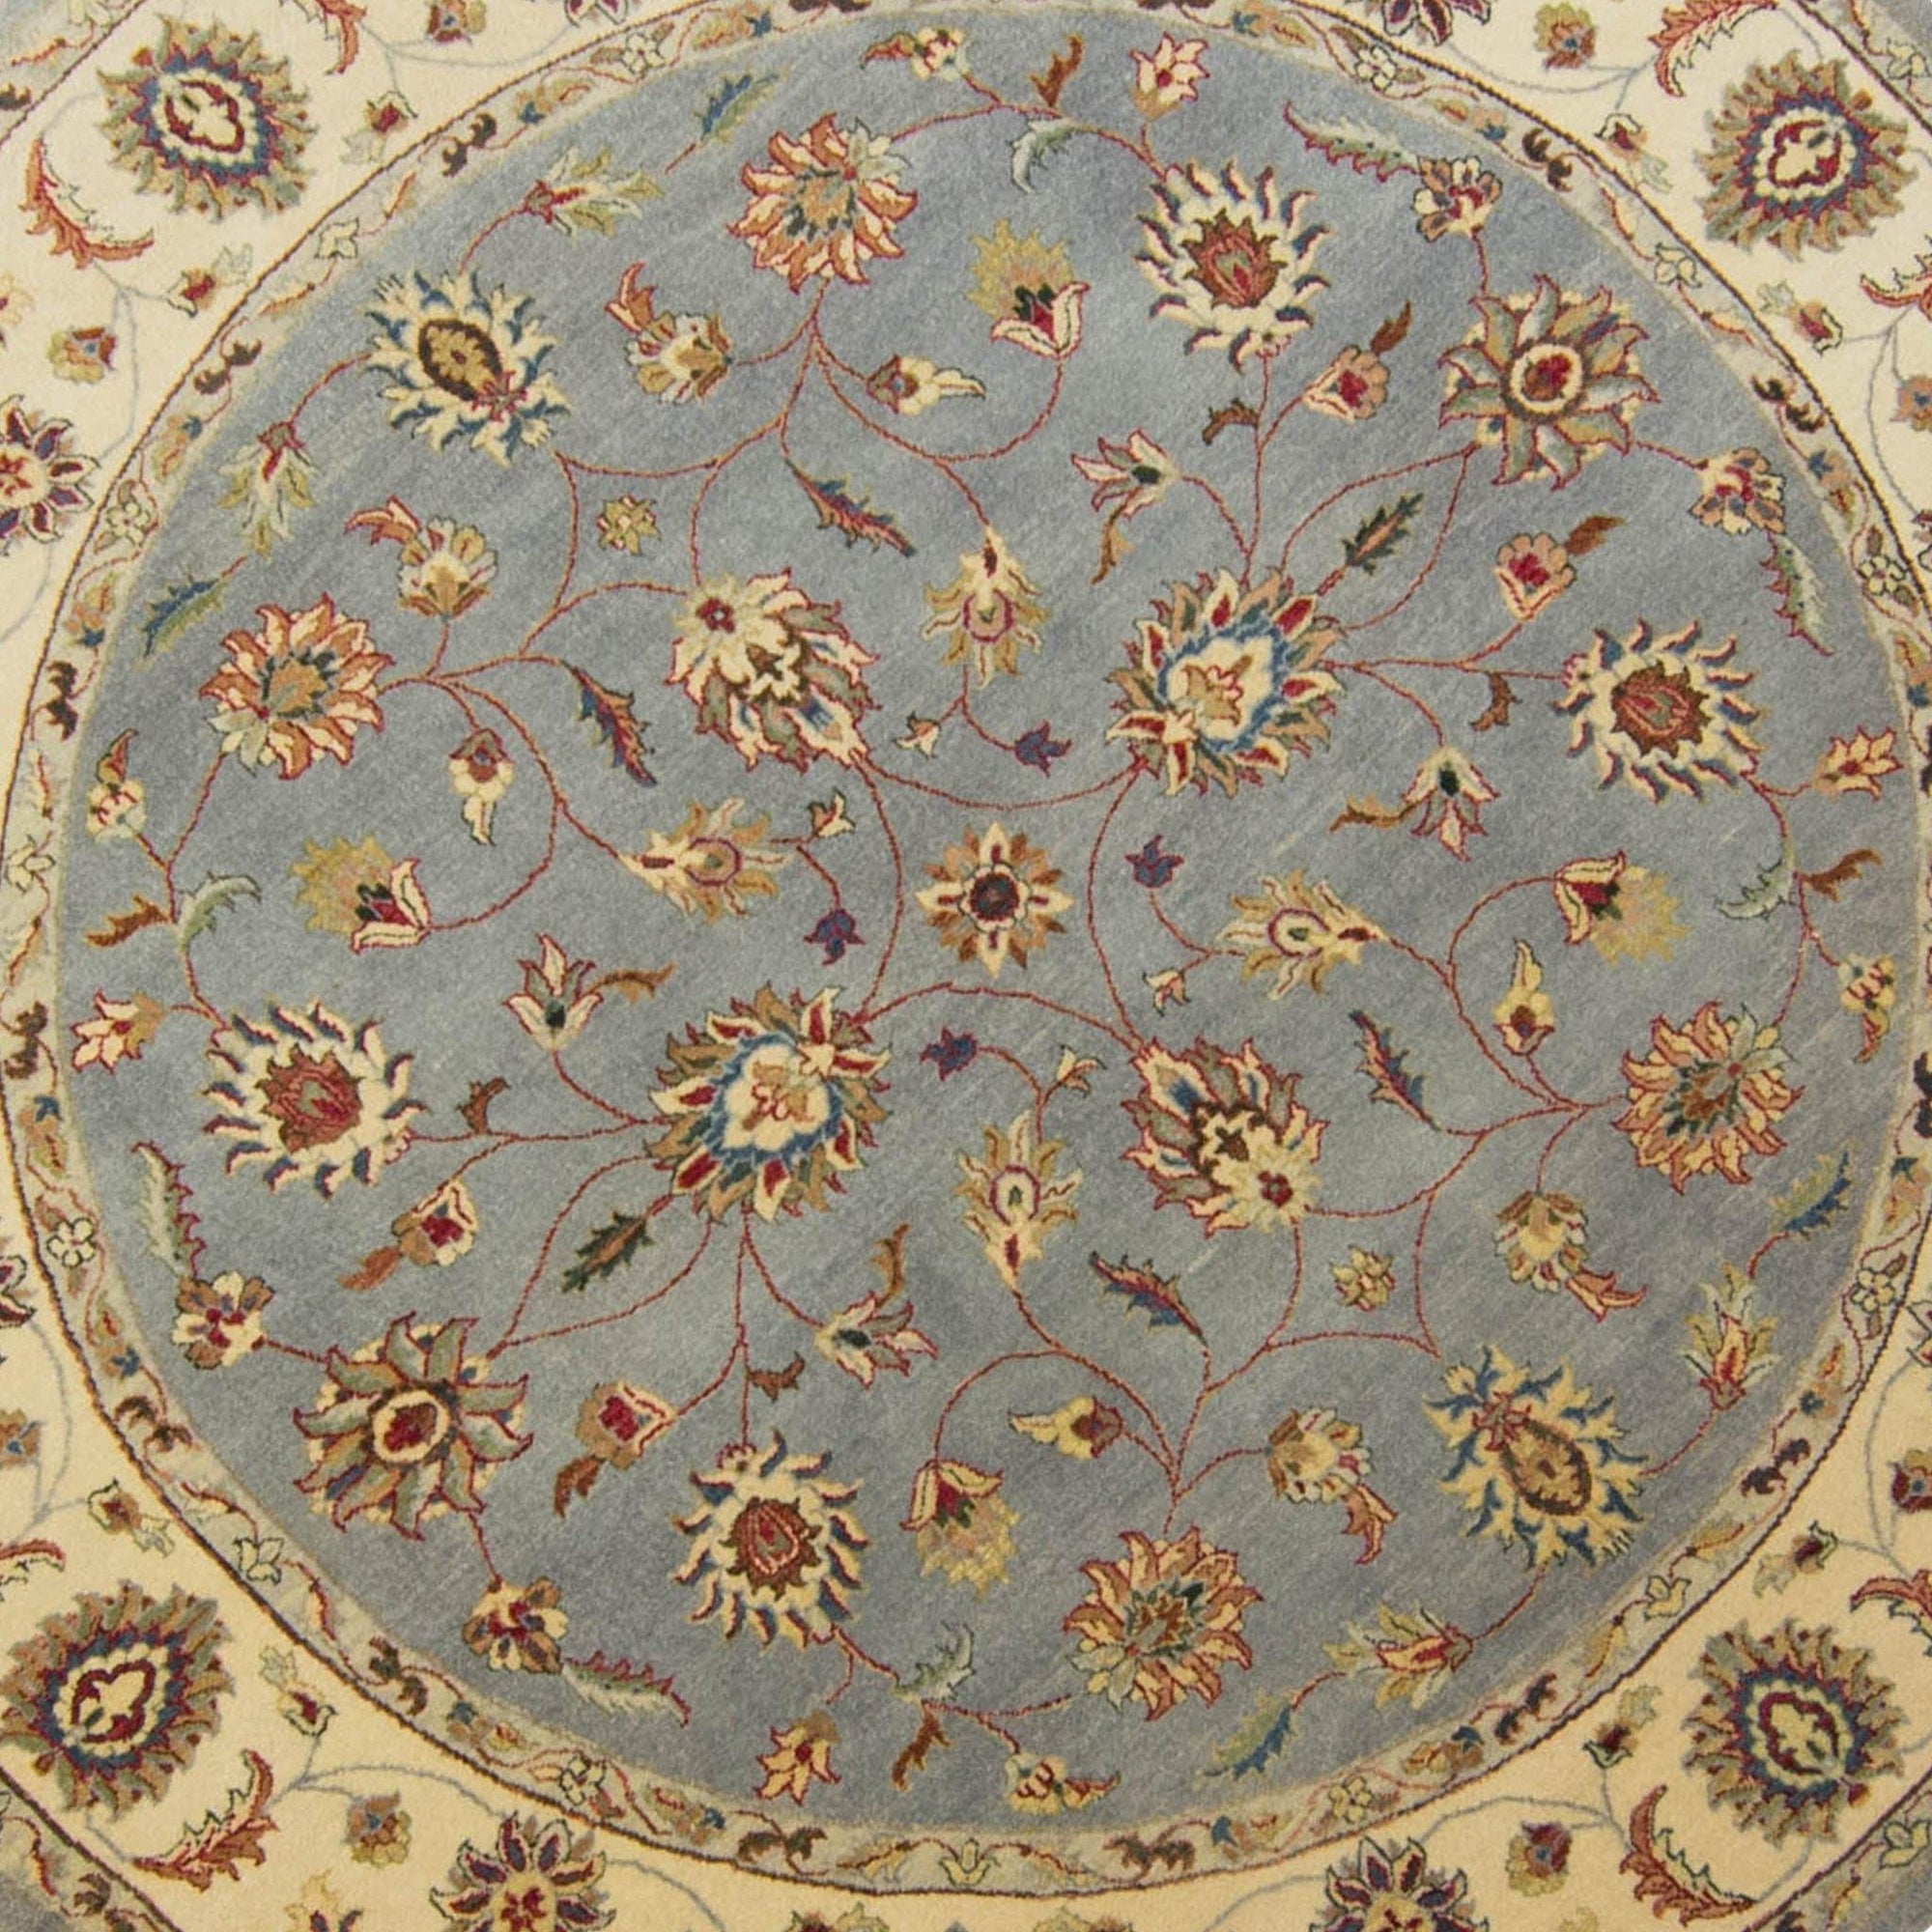 Hand-knotted Persian Kashan Round Rug 244cm x 248